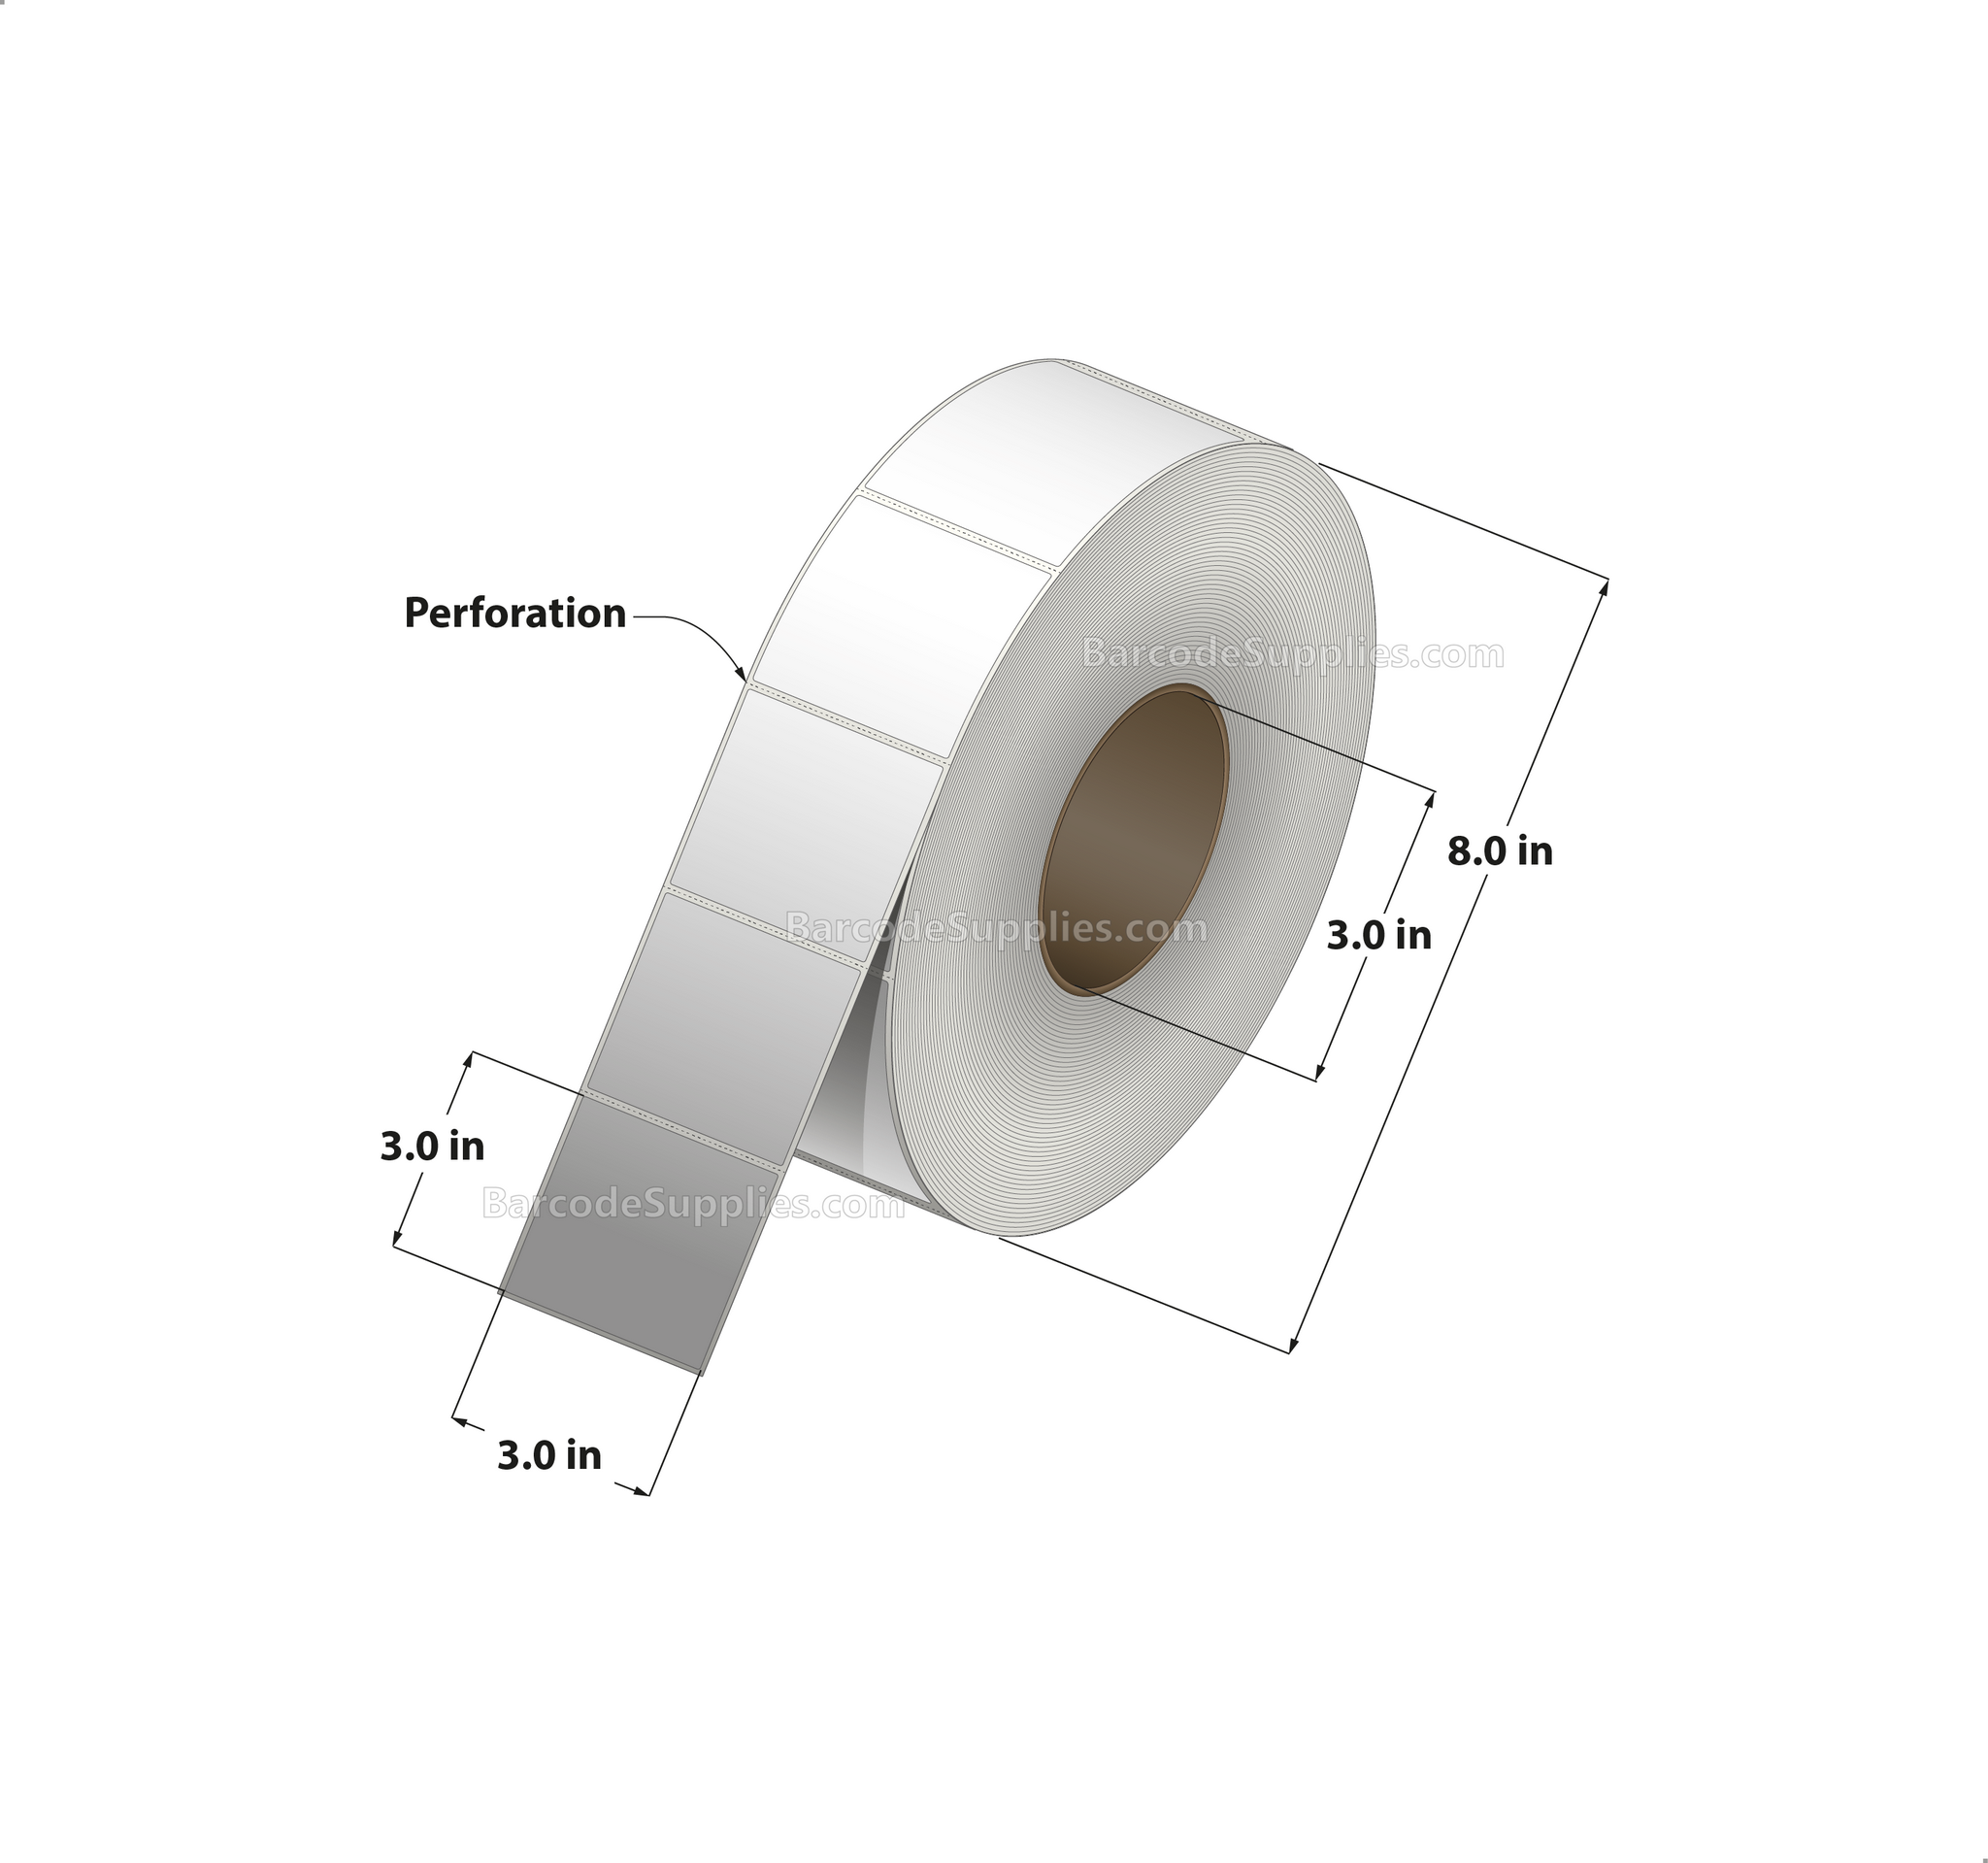 3 x 3 Thermal Transfer White Labels With Rubber Adhesive - Perforated - 2000 Labels Per Roll - Carton Of 6 Rolls - 12000 Labels Total - MPN: CTT300300-3P